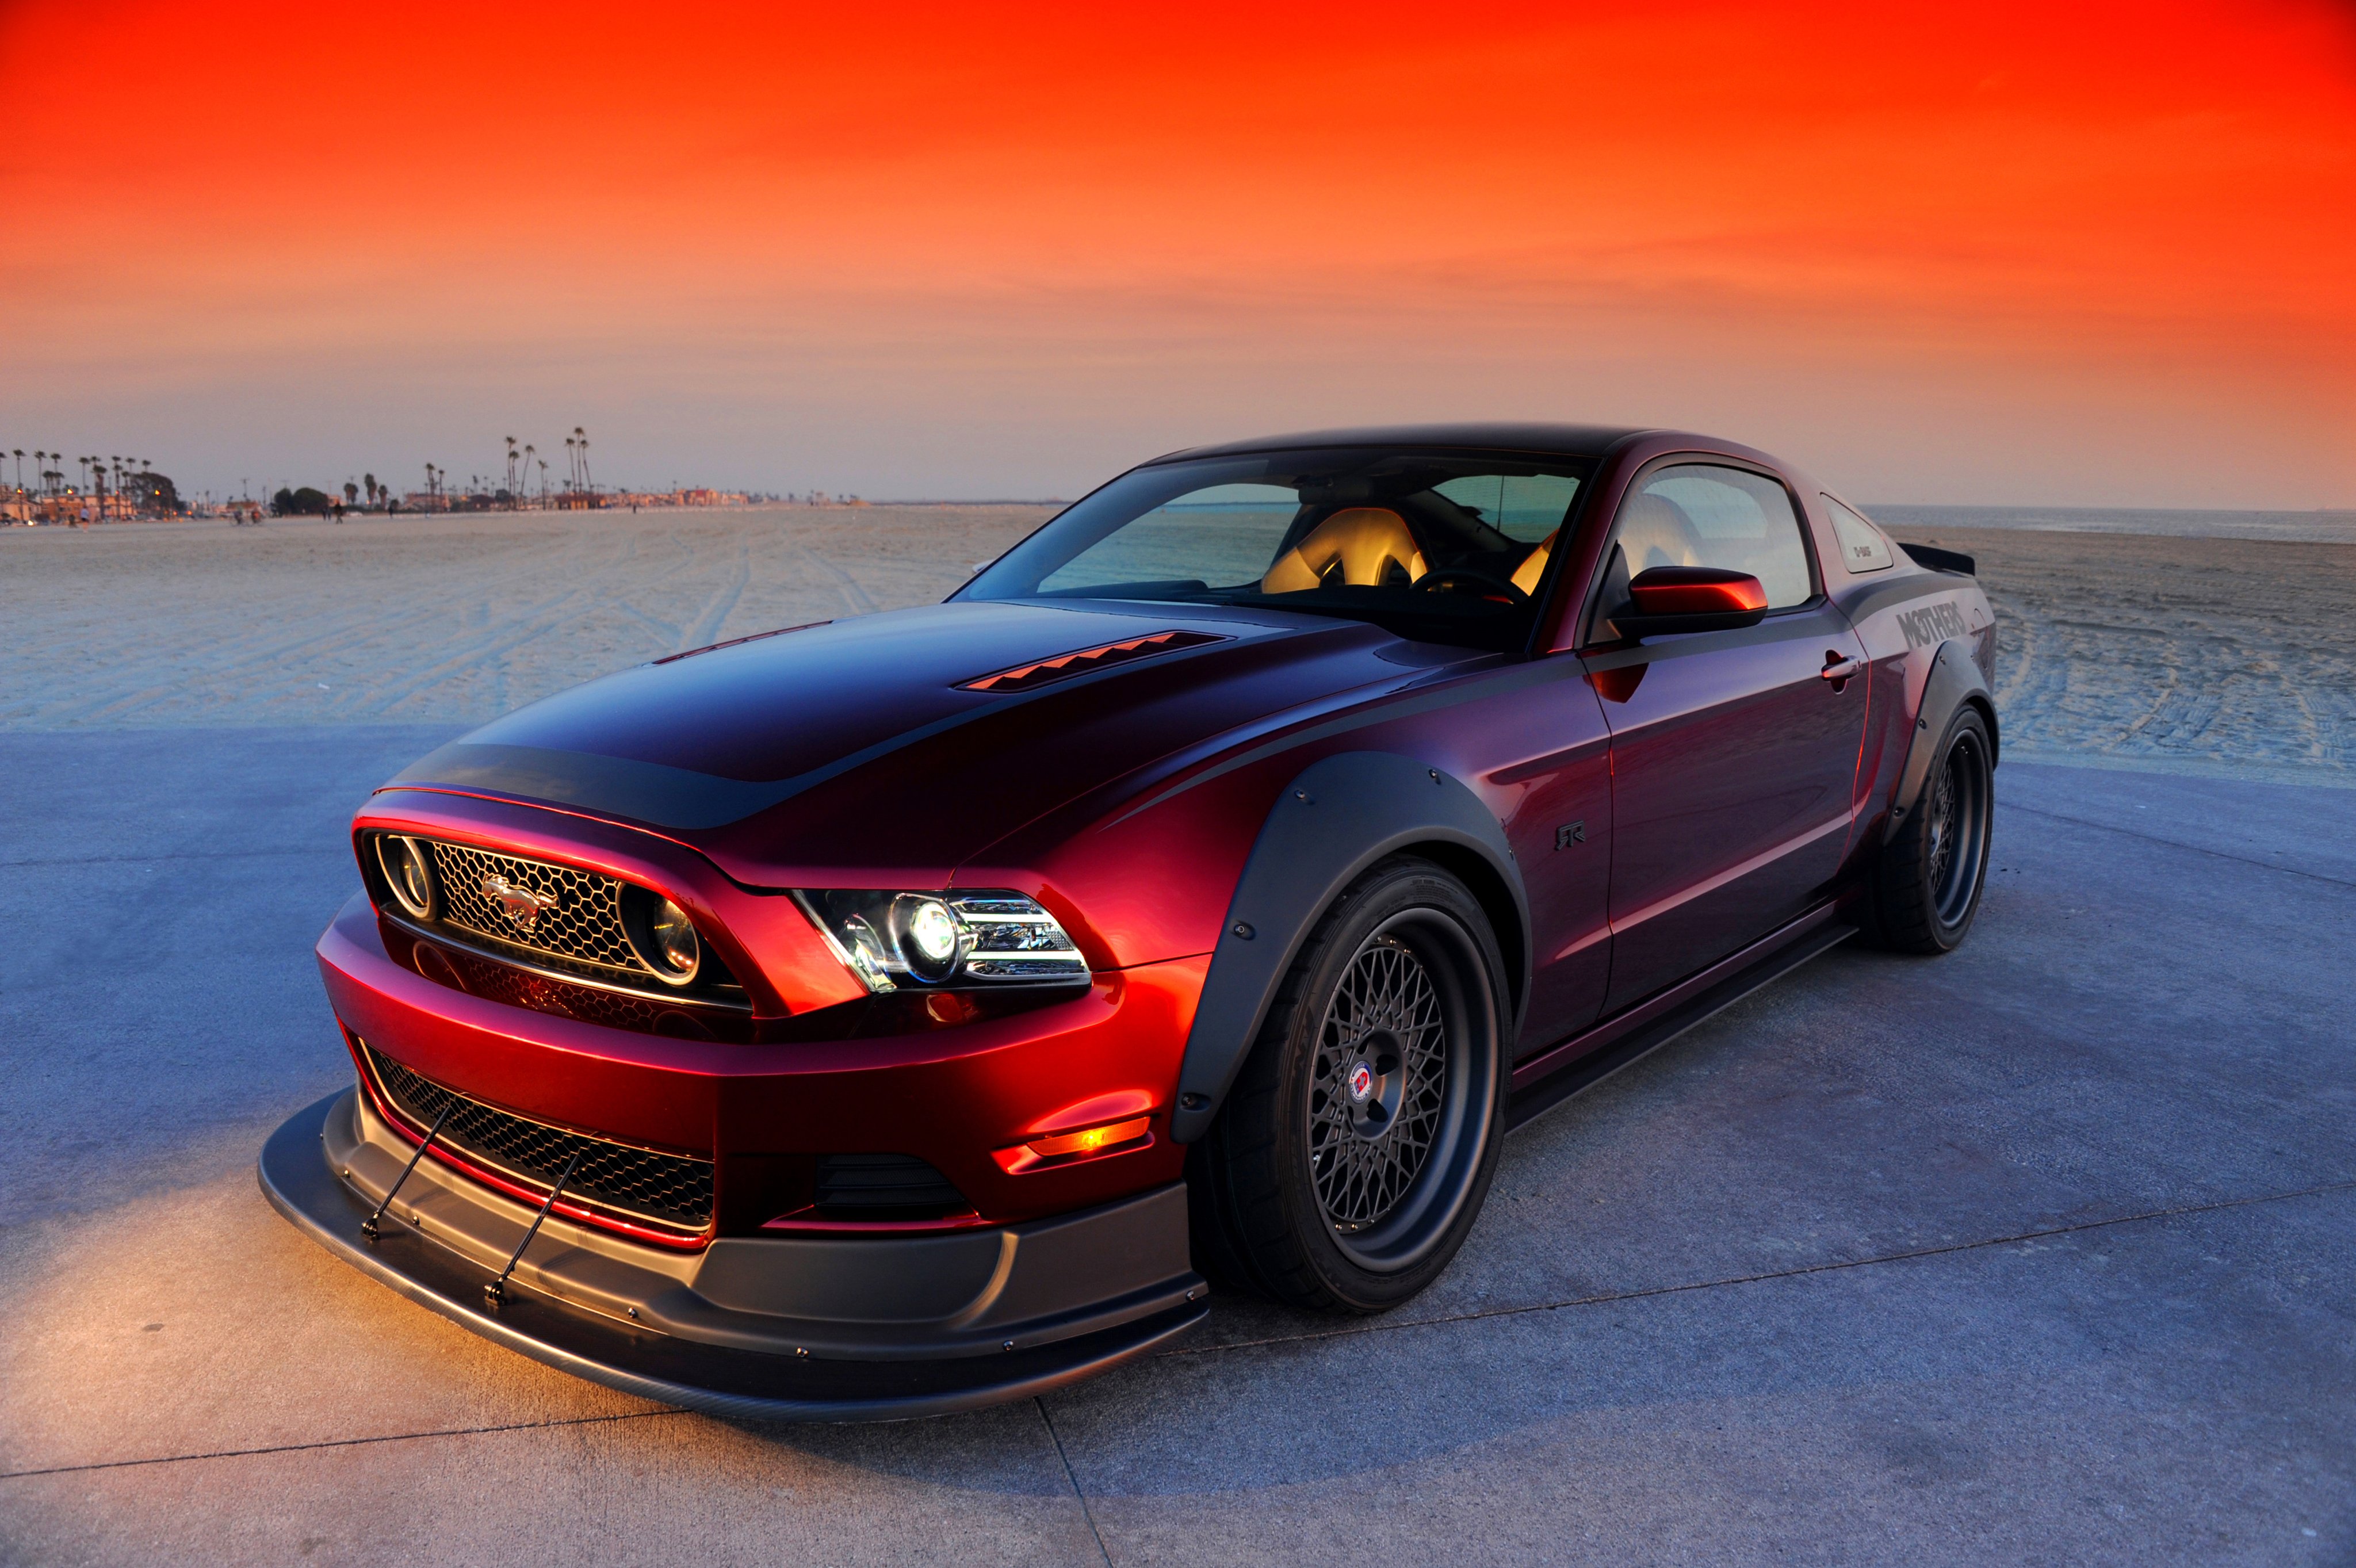 2013, Mothers, Ford, Mustang, G t, Rtr, Spec 3, Muscle, Tuning, Hot, Rod, Rods Wallpaper